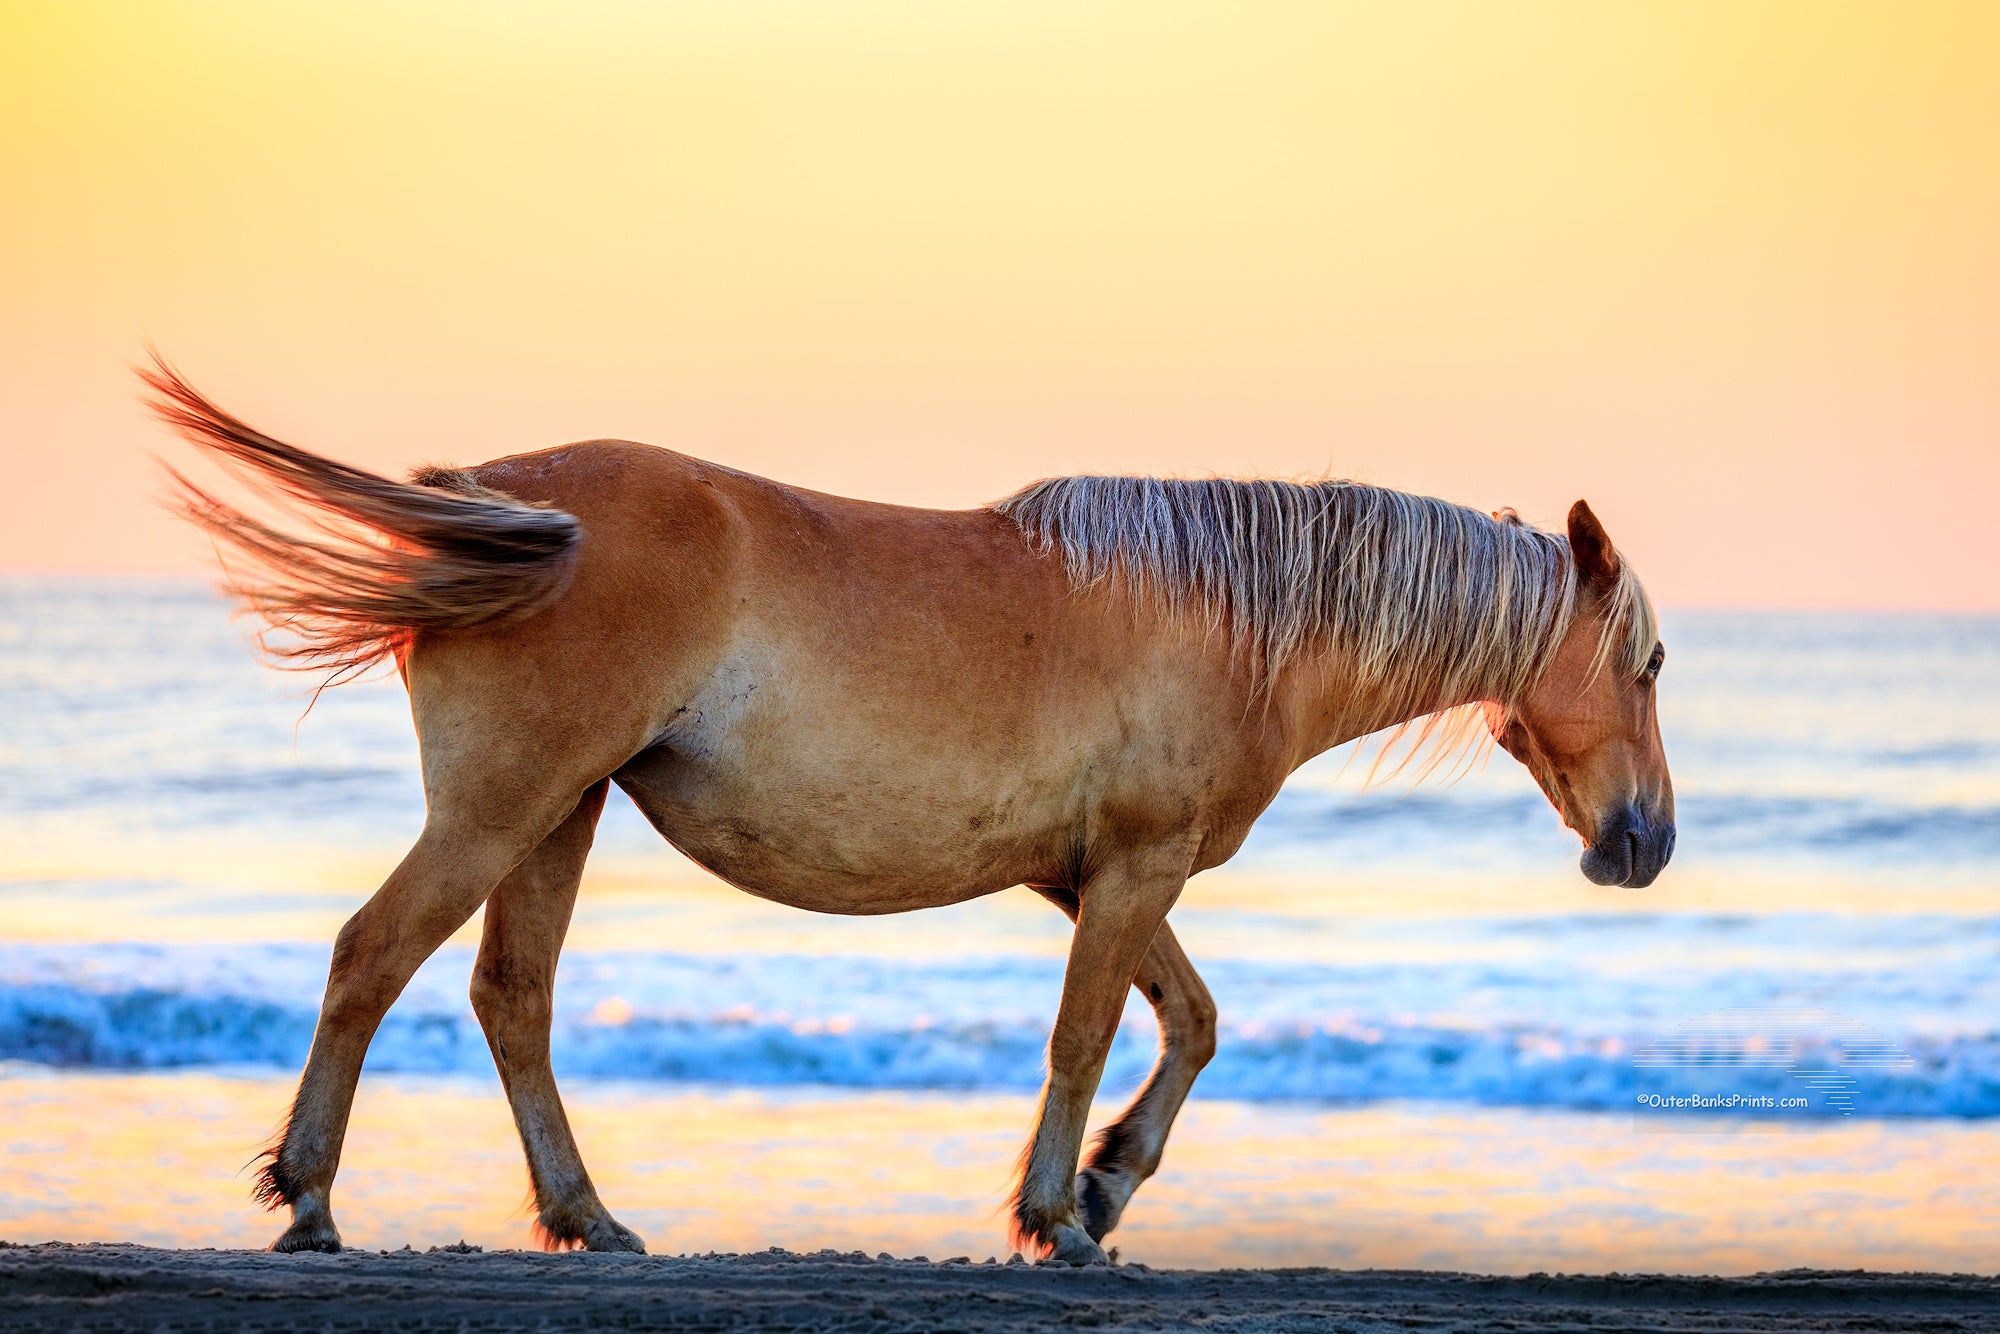 Wild Spanish mustangs have roamed free in the Northern Outer Banks for nearly 500 years. They are descended from horses from ancient shipwrecks. A small herd of nearly 100 wild mustangs still roam free in the 4WD section of the Northern Outer Banks.